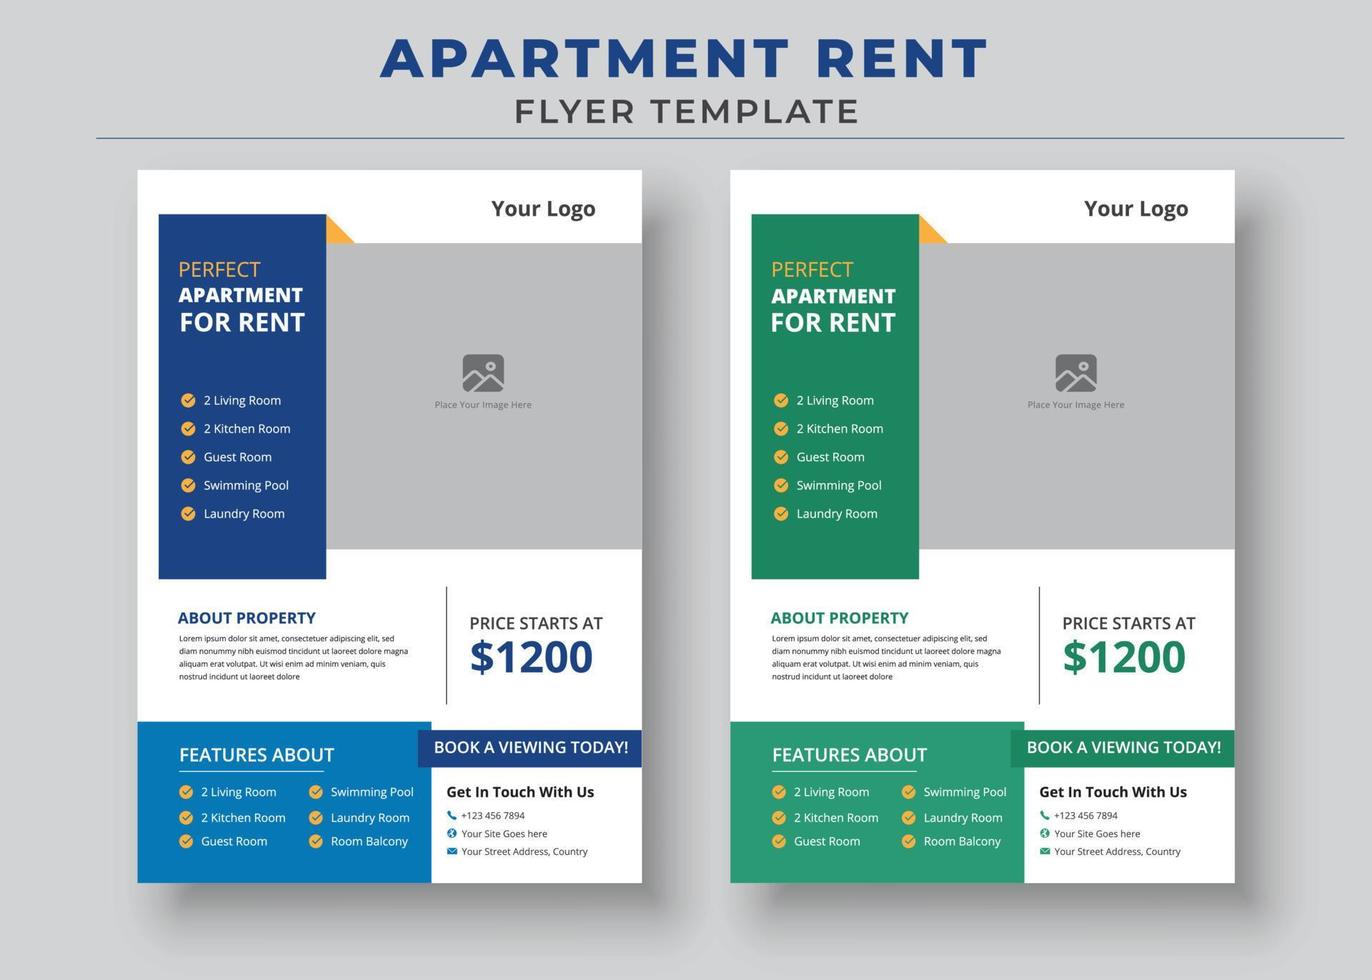 Perfect Apartment For Rent Poster, Apartment Rent Flyer Template, Home For Rent Flyer, Real Estate Flyer vector